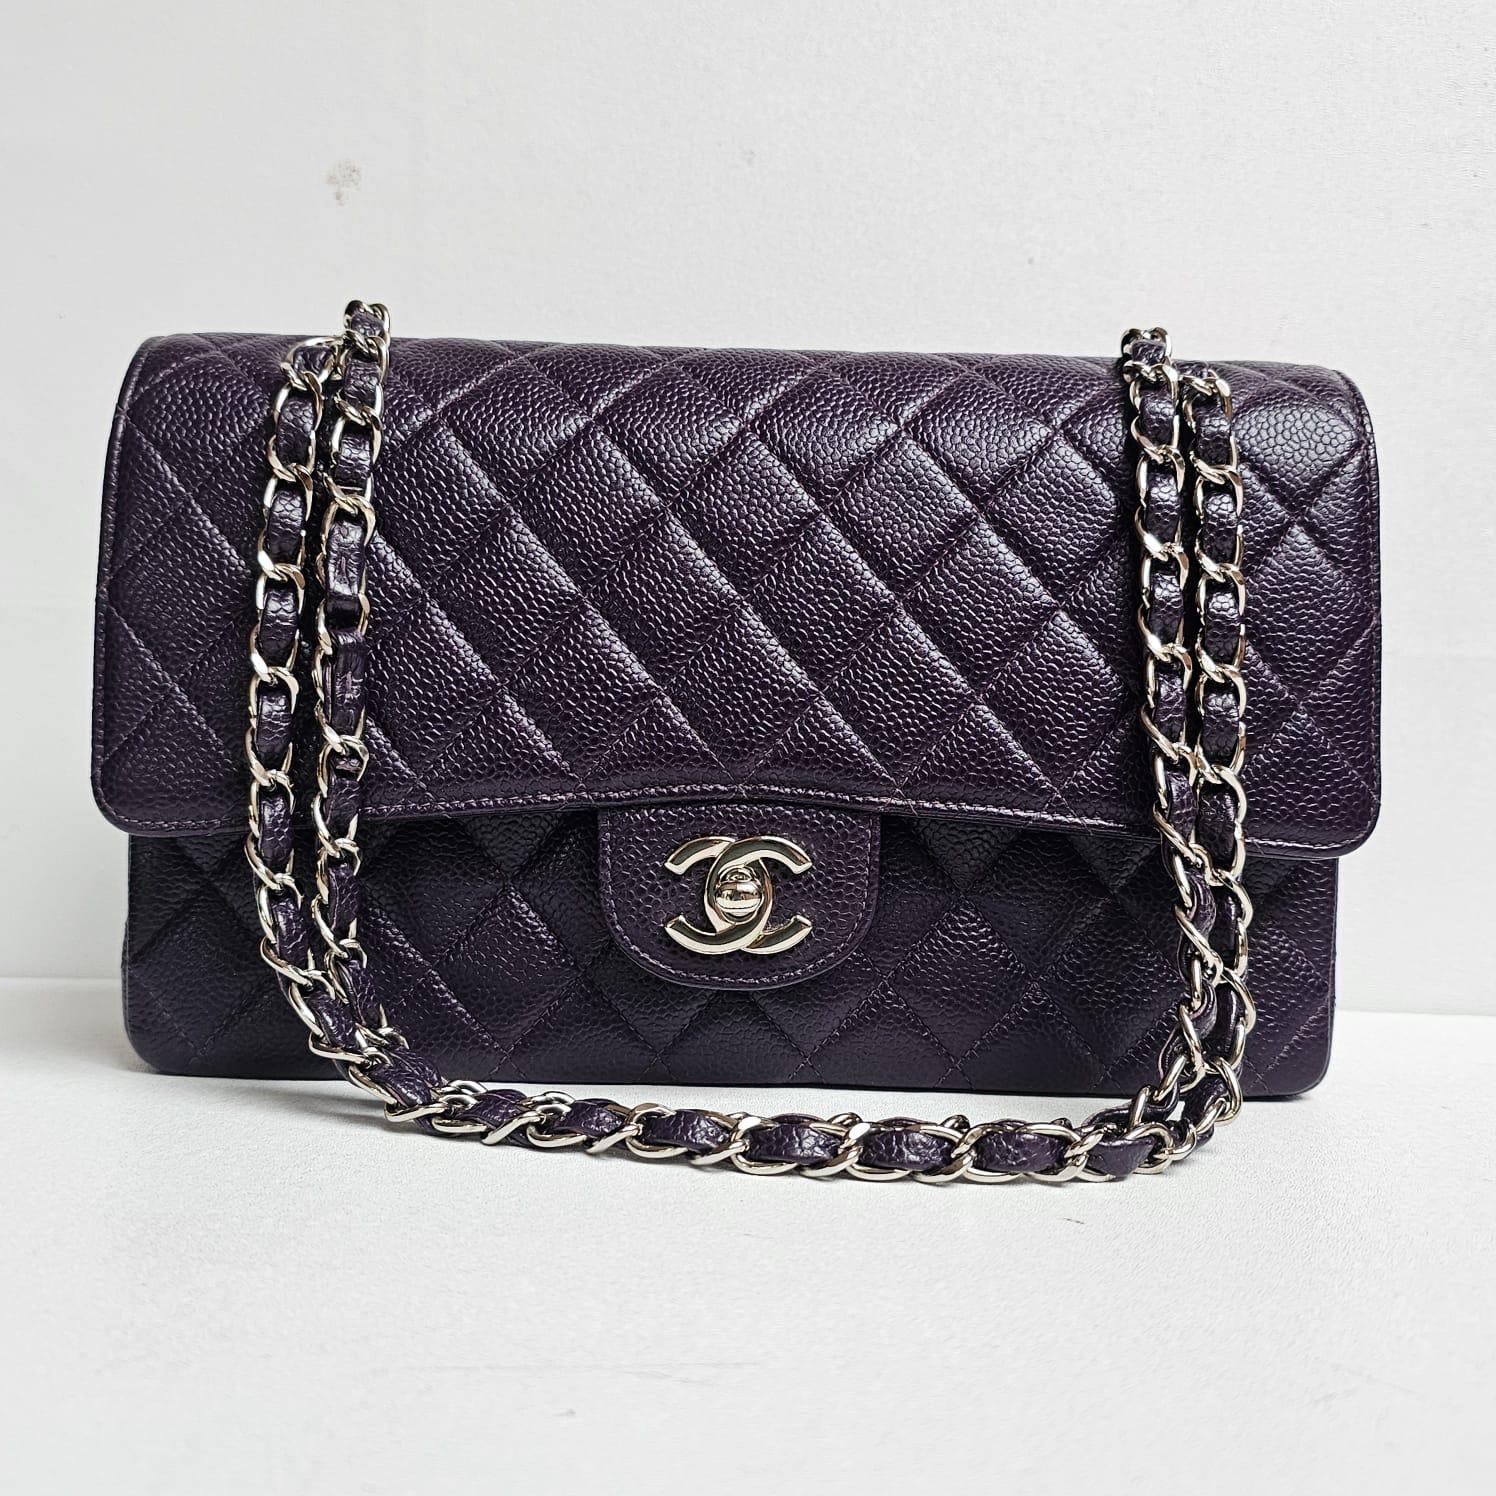 Classic medium chanel in rare dark purple color with silver hardware. Vintage series 6. Overall in very well structured condition. Minor scuffing on the leather lining and corners. Comes with its holo, card and replacement dust bag.